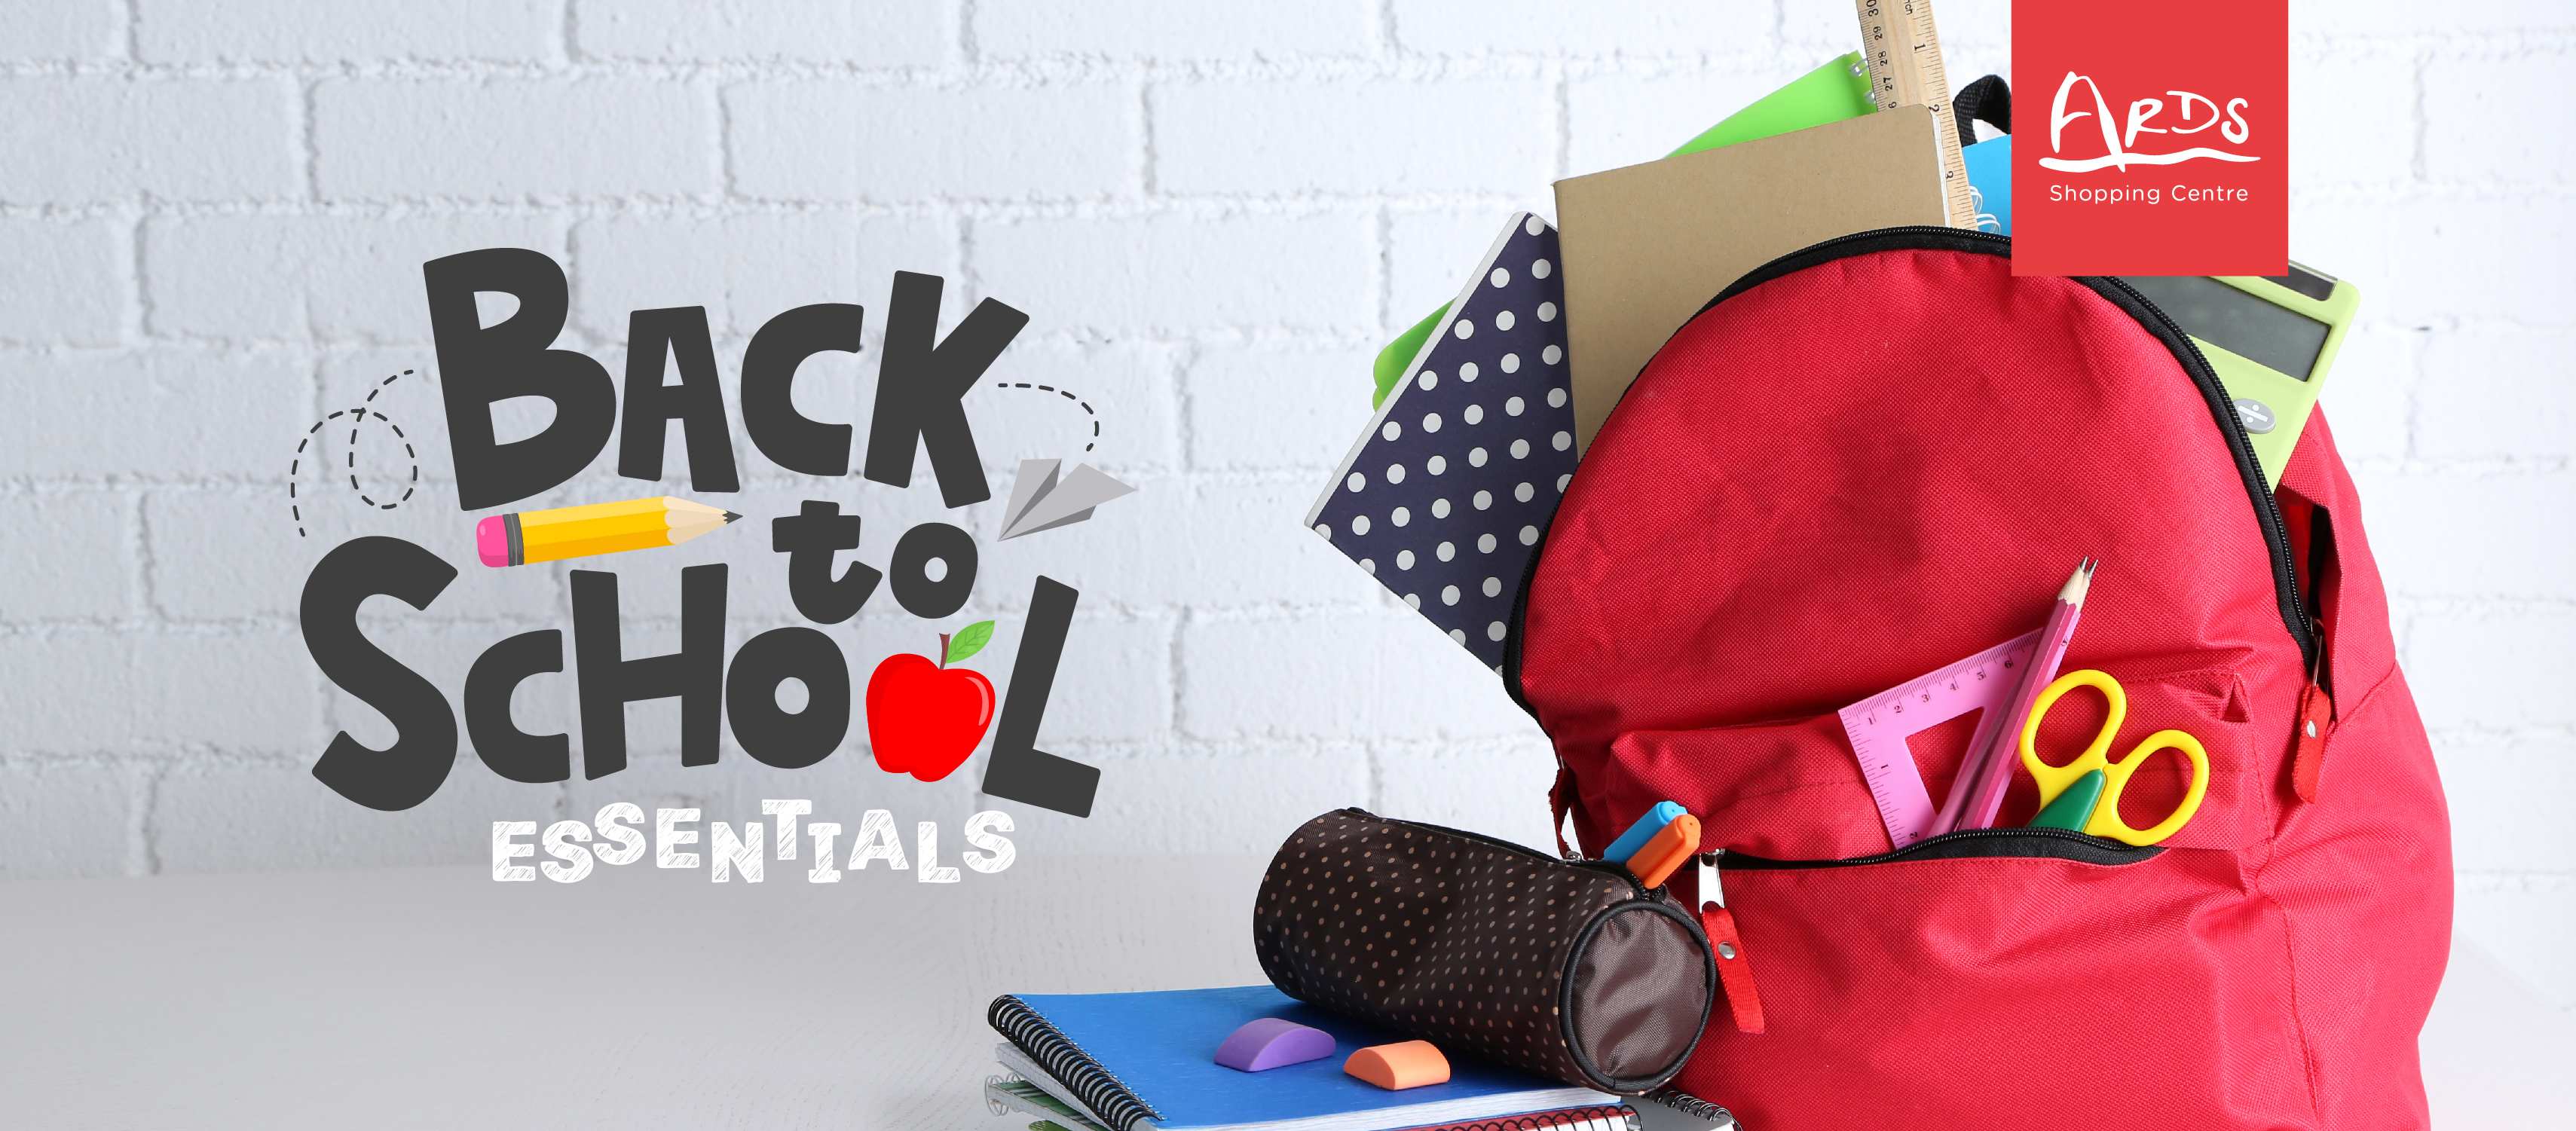 Back To School Essentials at Ards!